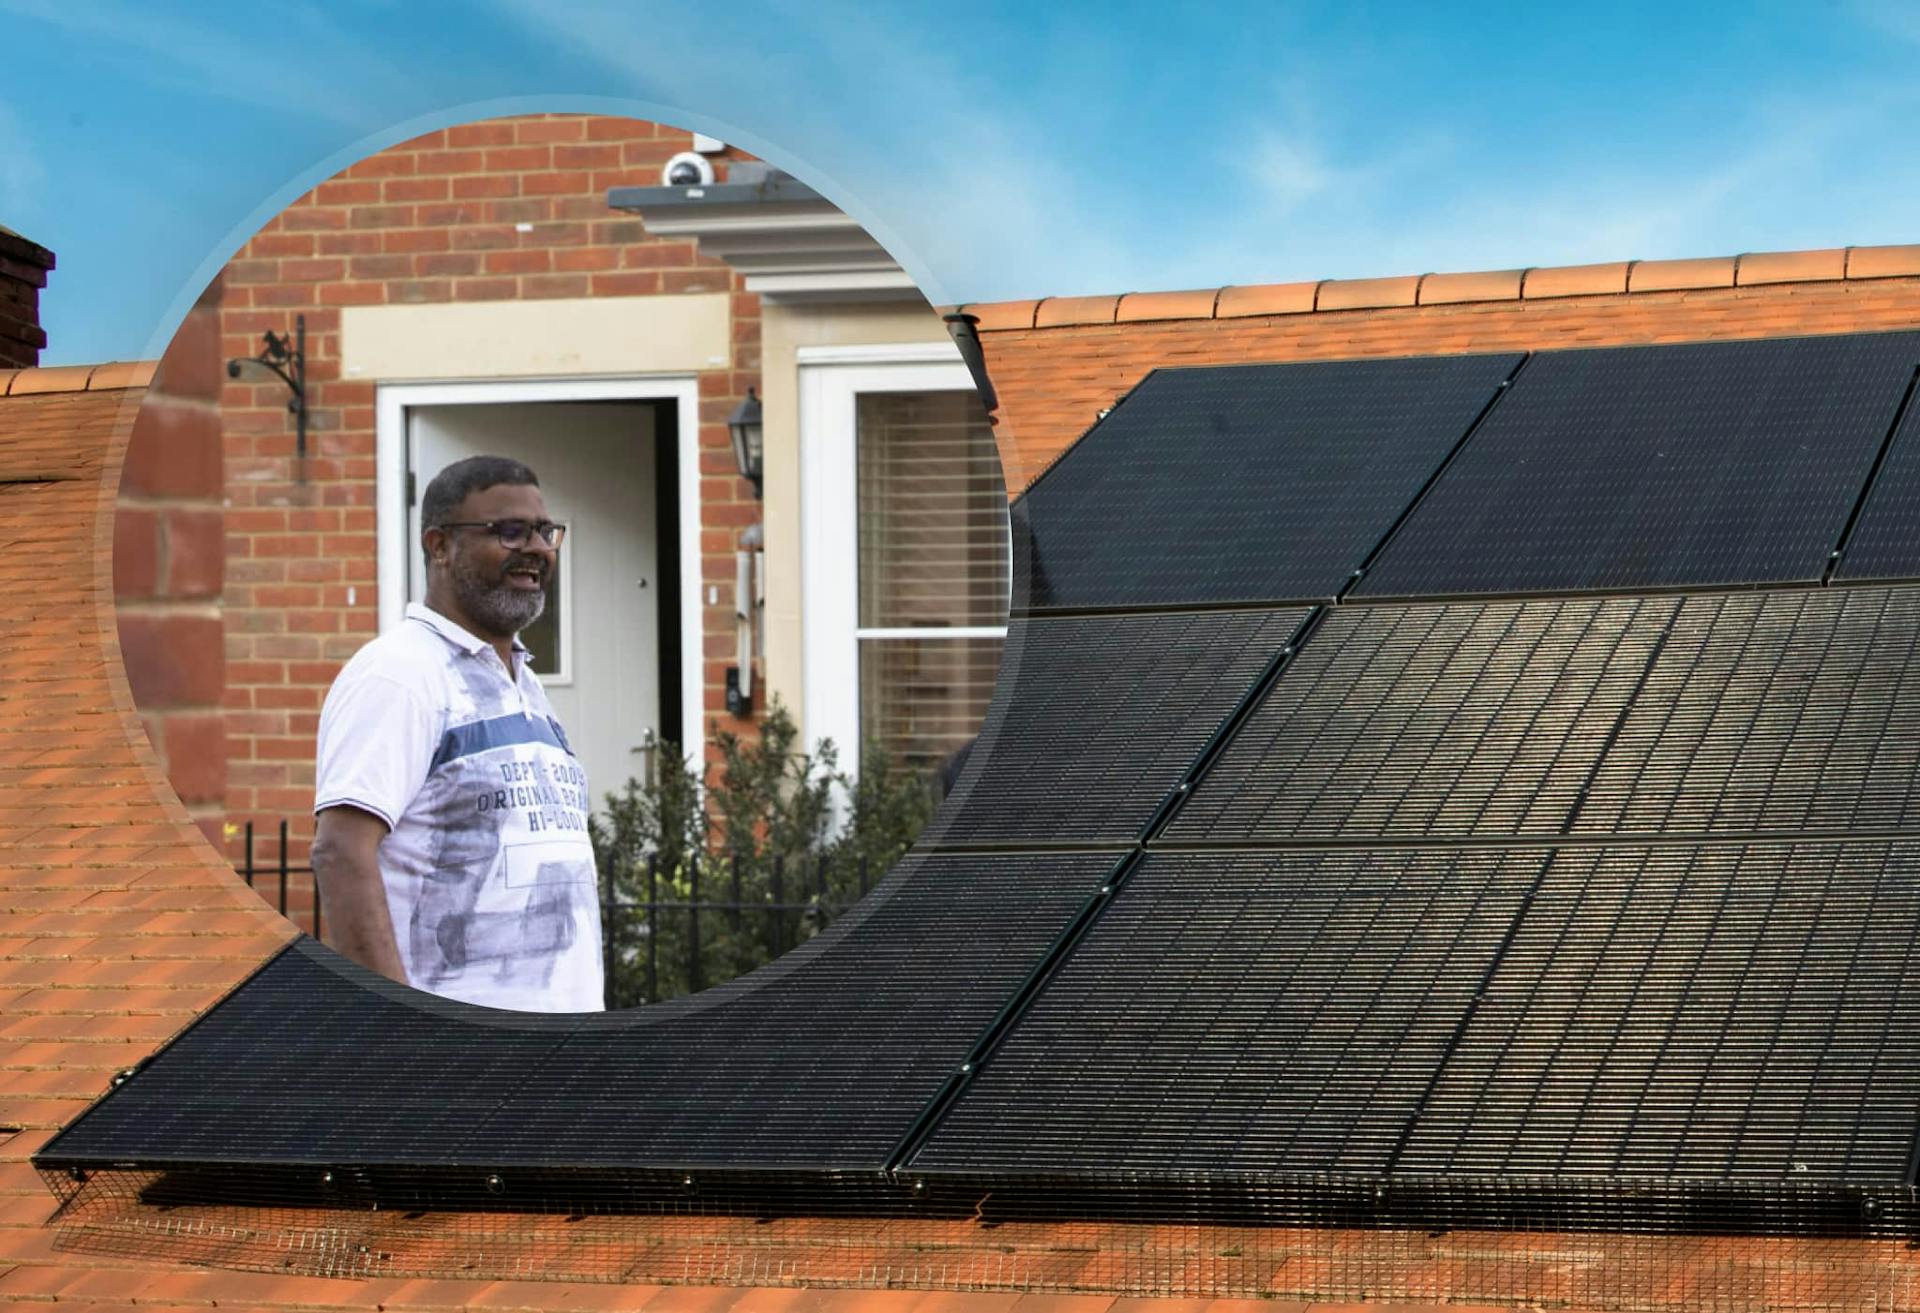 Customer with solar panels installed on their house